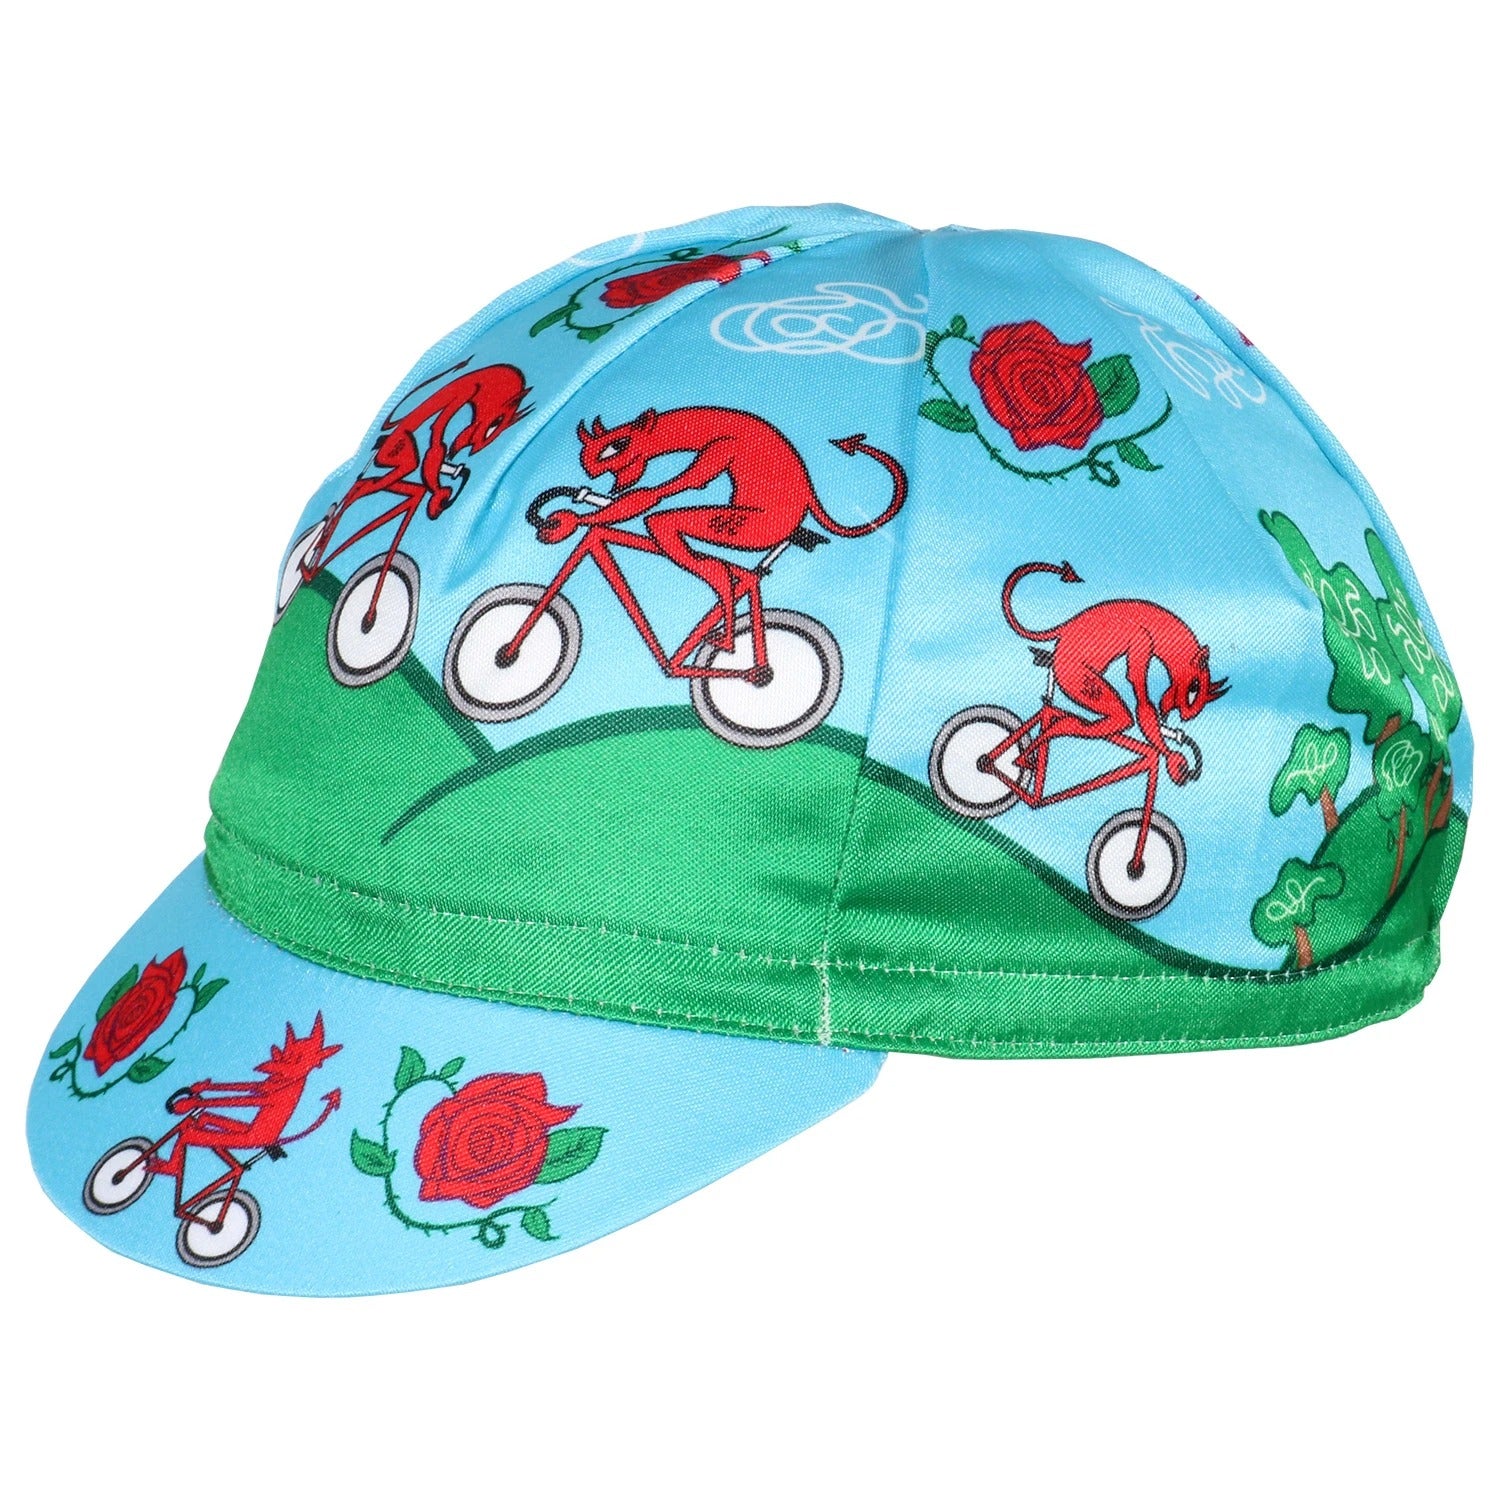 CINELLI Cycling Cap by Massimo Giacon